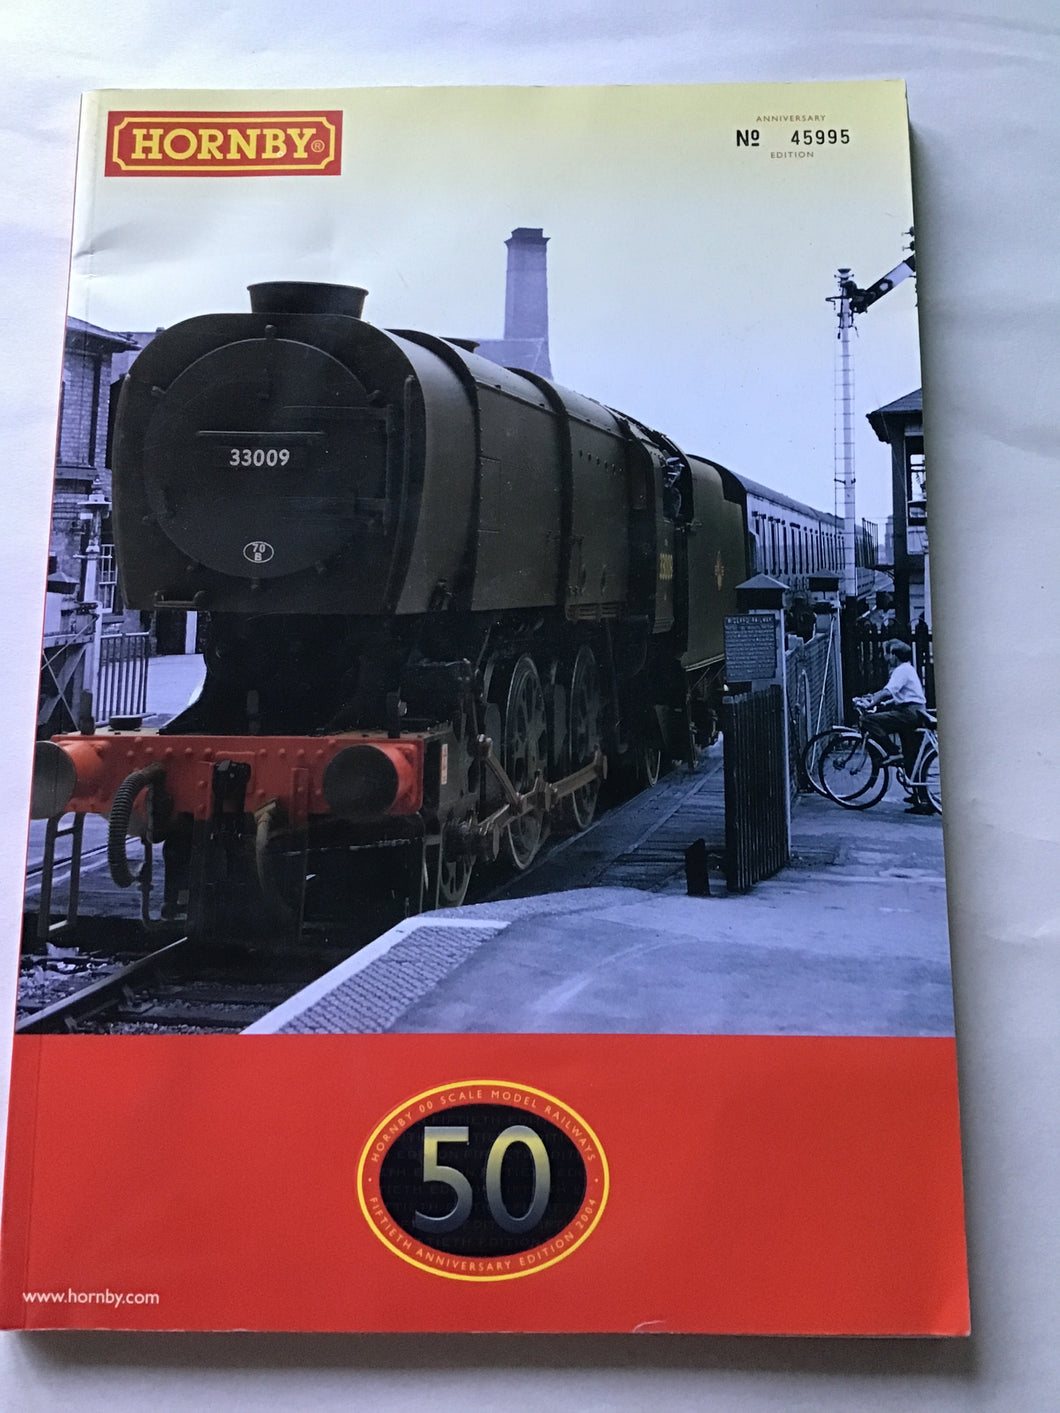 Hornby model railway catalogue OO scale model railways 50th anniversary edition 2004 number 45995